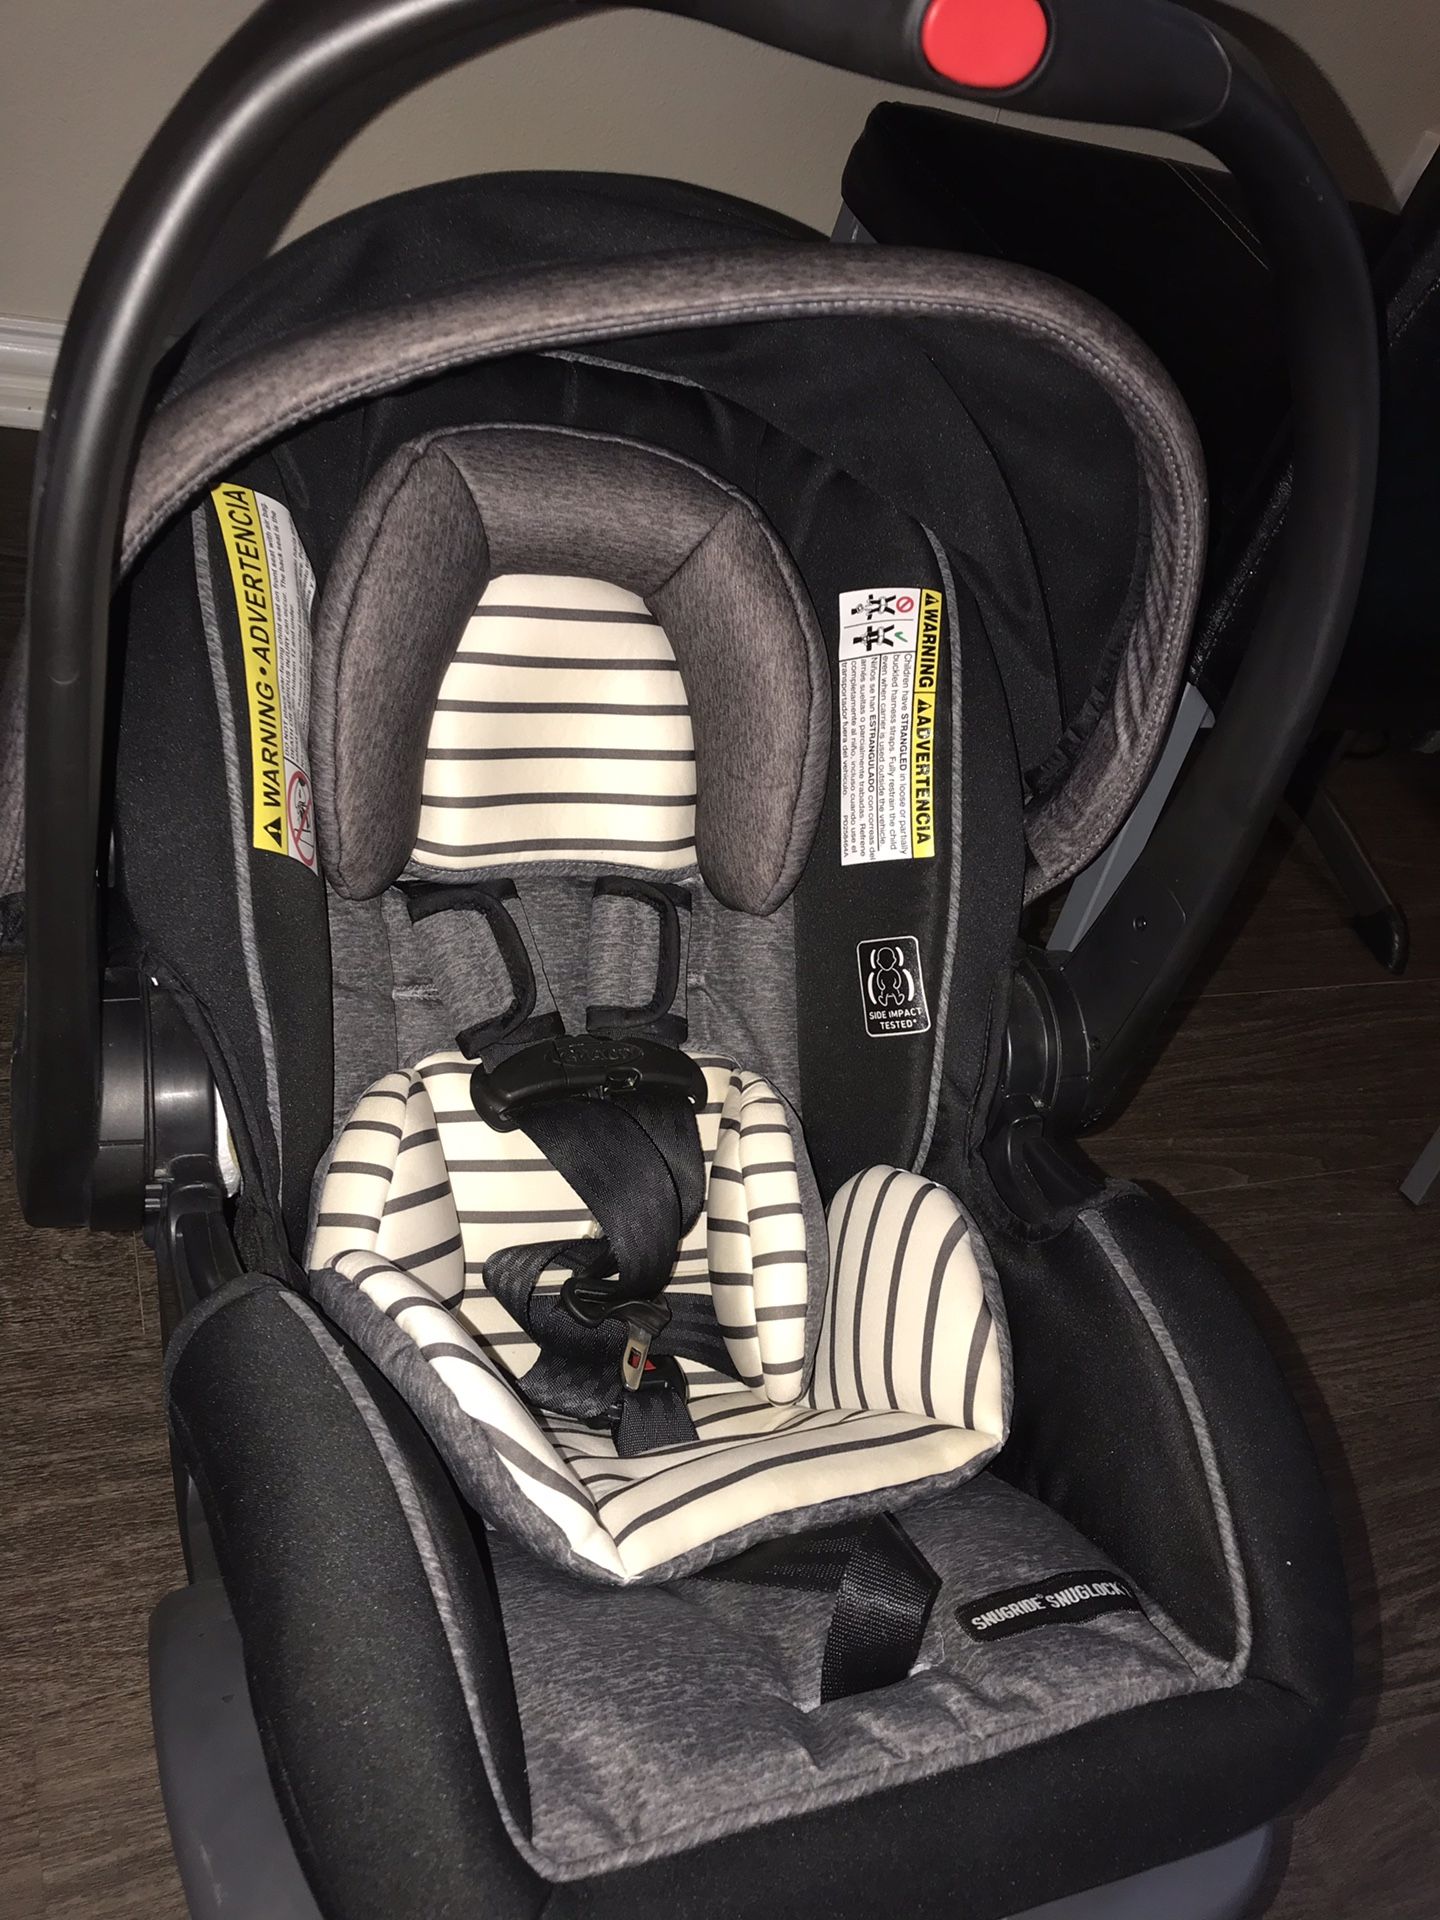 Graco car seat with base in Excellent condition